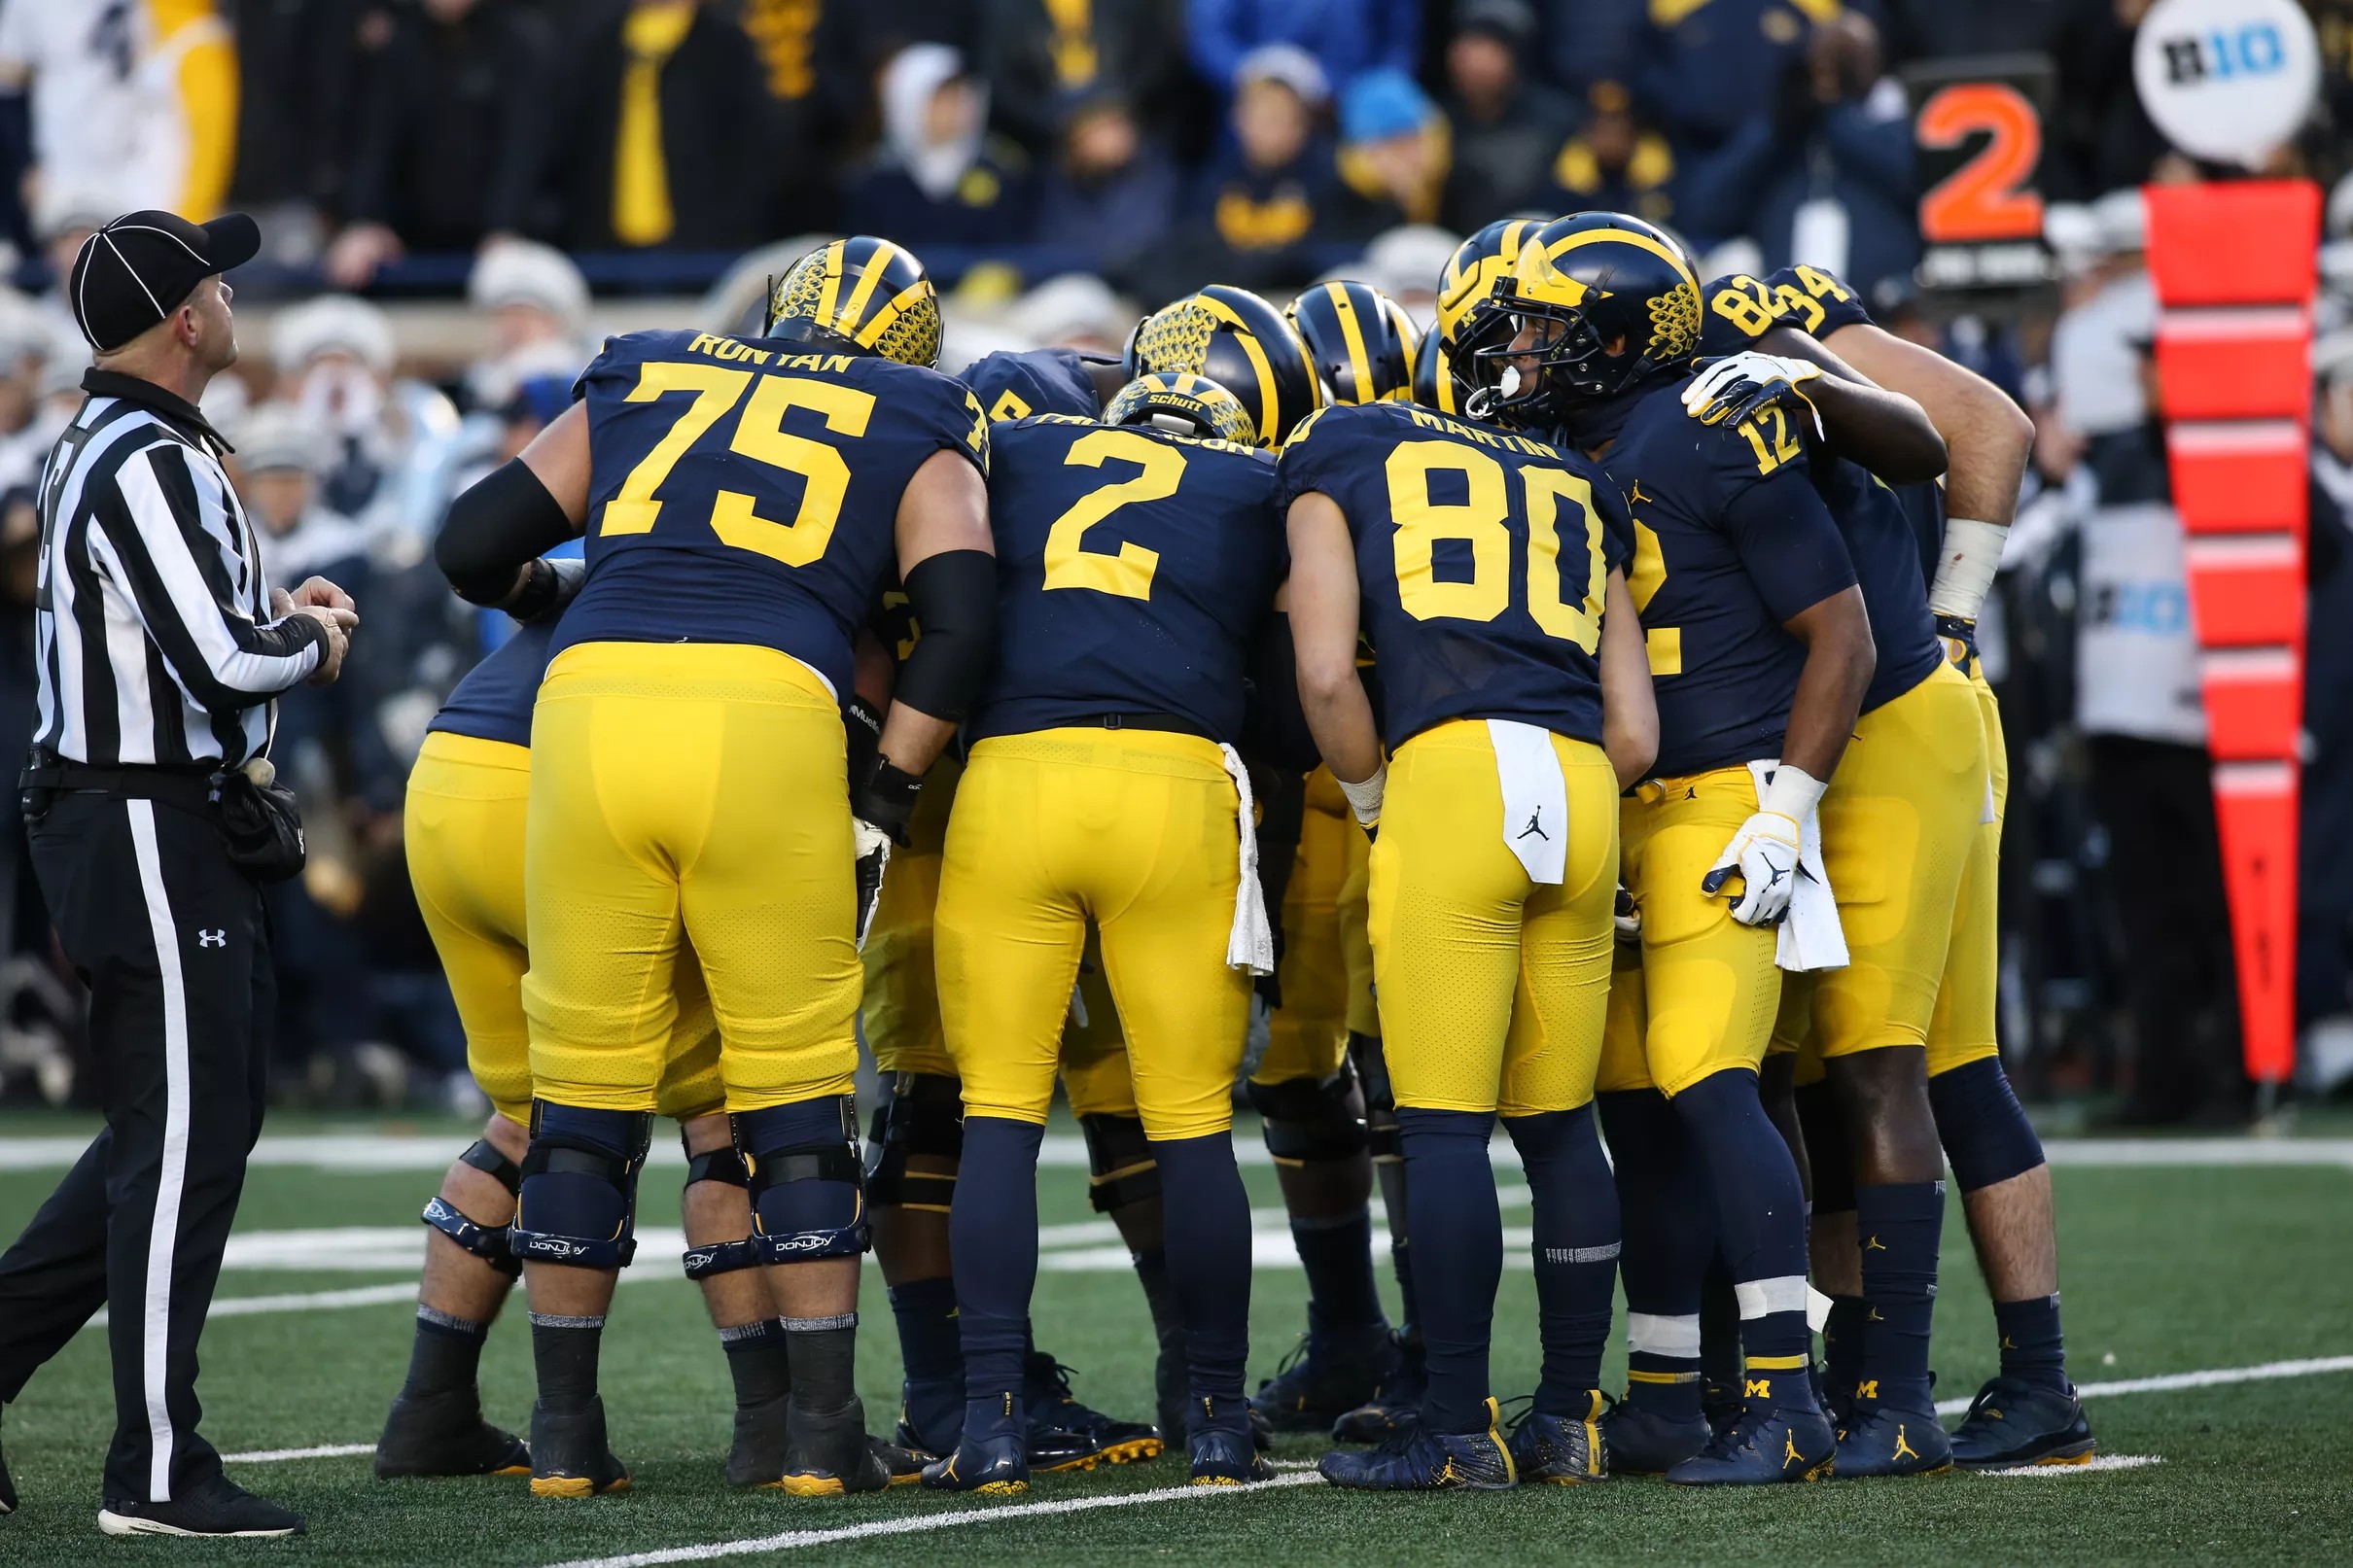 Michigan Football’s projected starting lineup vs. Middle Tennessee